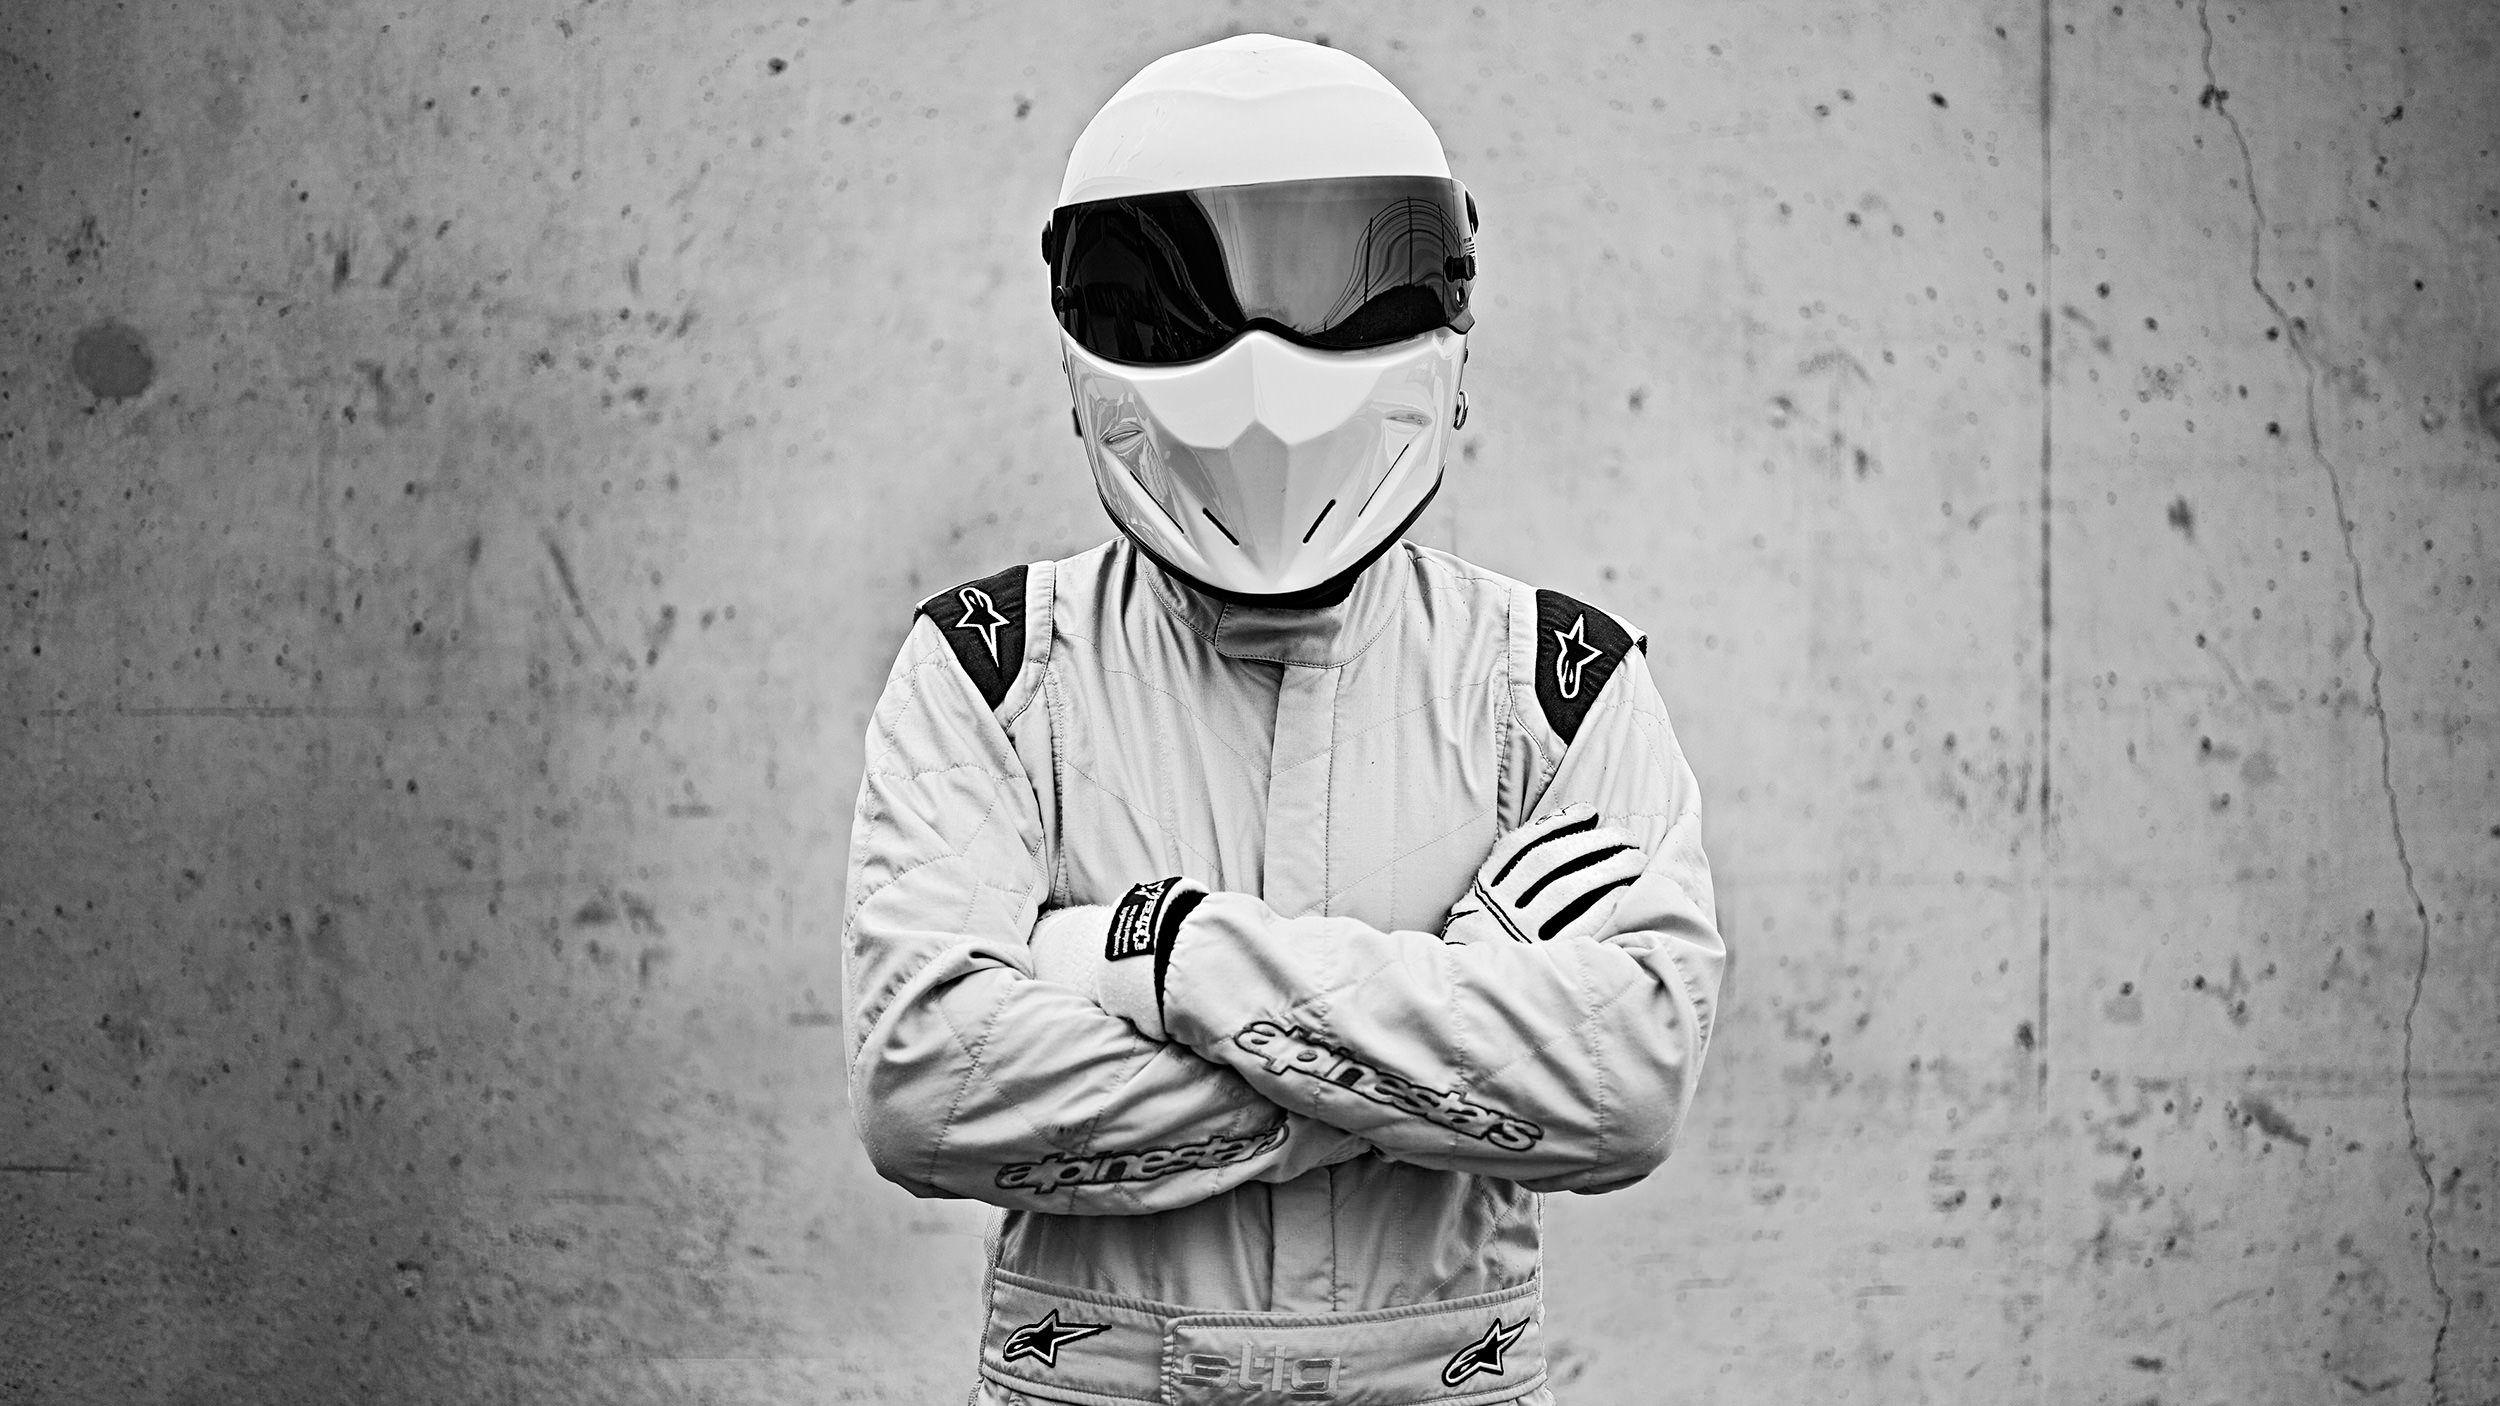 Filming Top Gear from the Perspective of The Stig. The Black and Blue